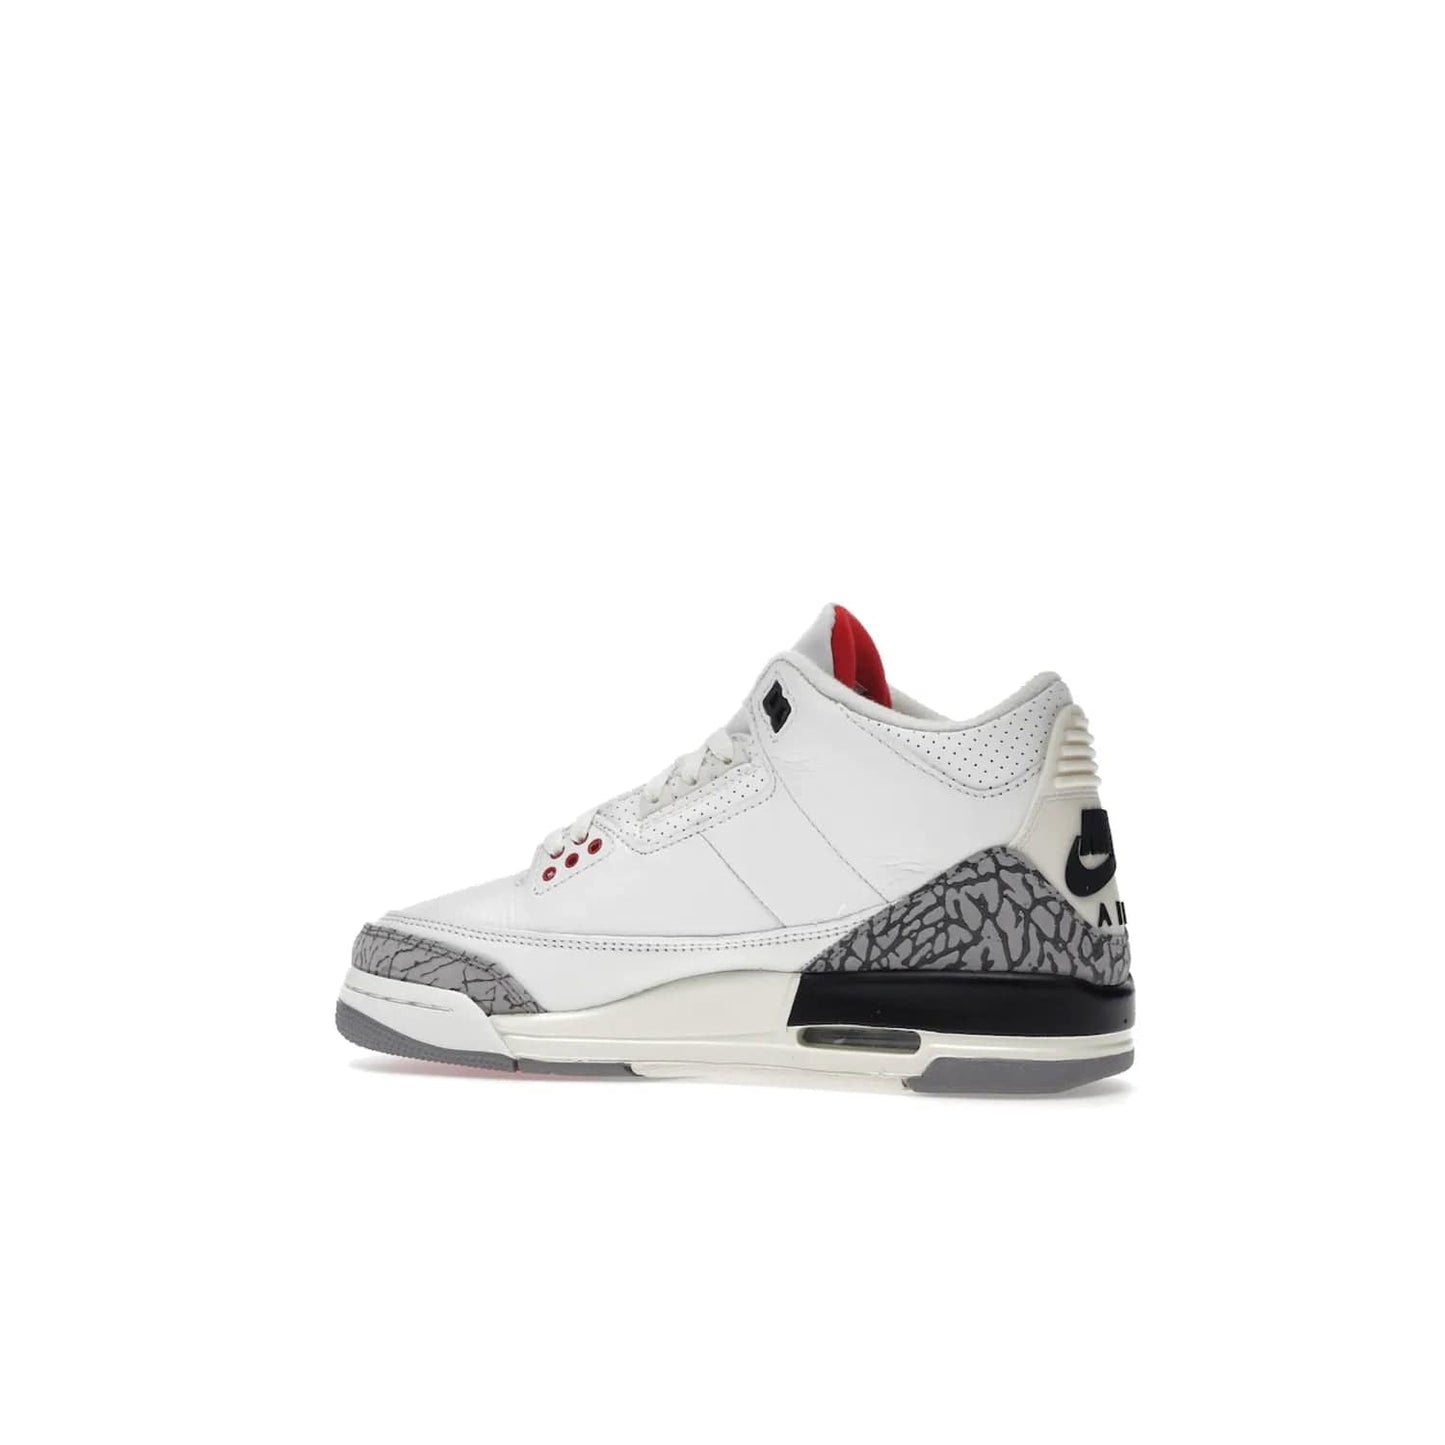 Jordan 3 Retro White Cement Reimagined (GS) - Image 21 - Only at www.BallersClubKickz.com - Grab the perfect blend of modern design and classic style with the Jordan 3 Retro White Cement Reimagined (GS). Features Summit White, Fire Red, Black, and Cement Grey colorway, iconic Jordan logo embroidered on the tongue, and “Nike Air” branding. Limited availability, get your pair before March 11th 2023.